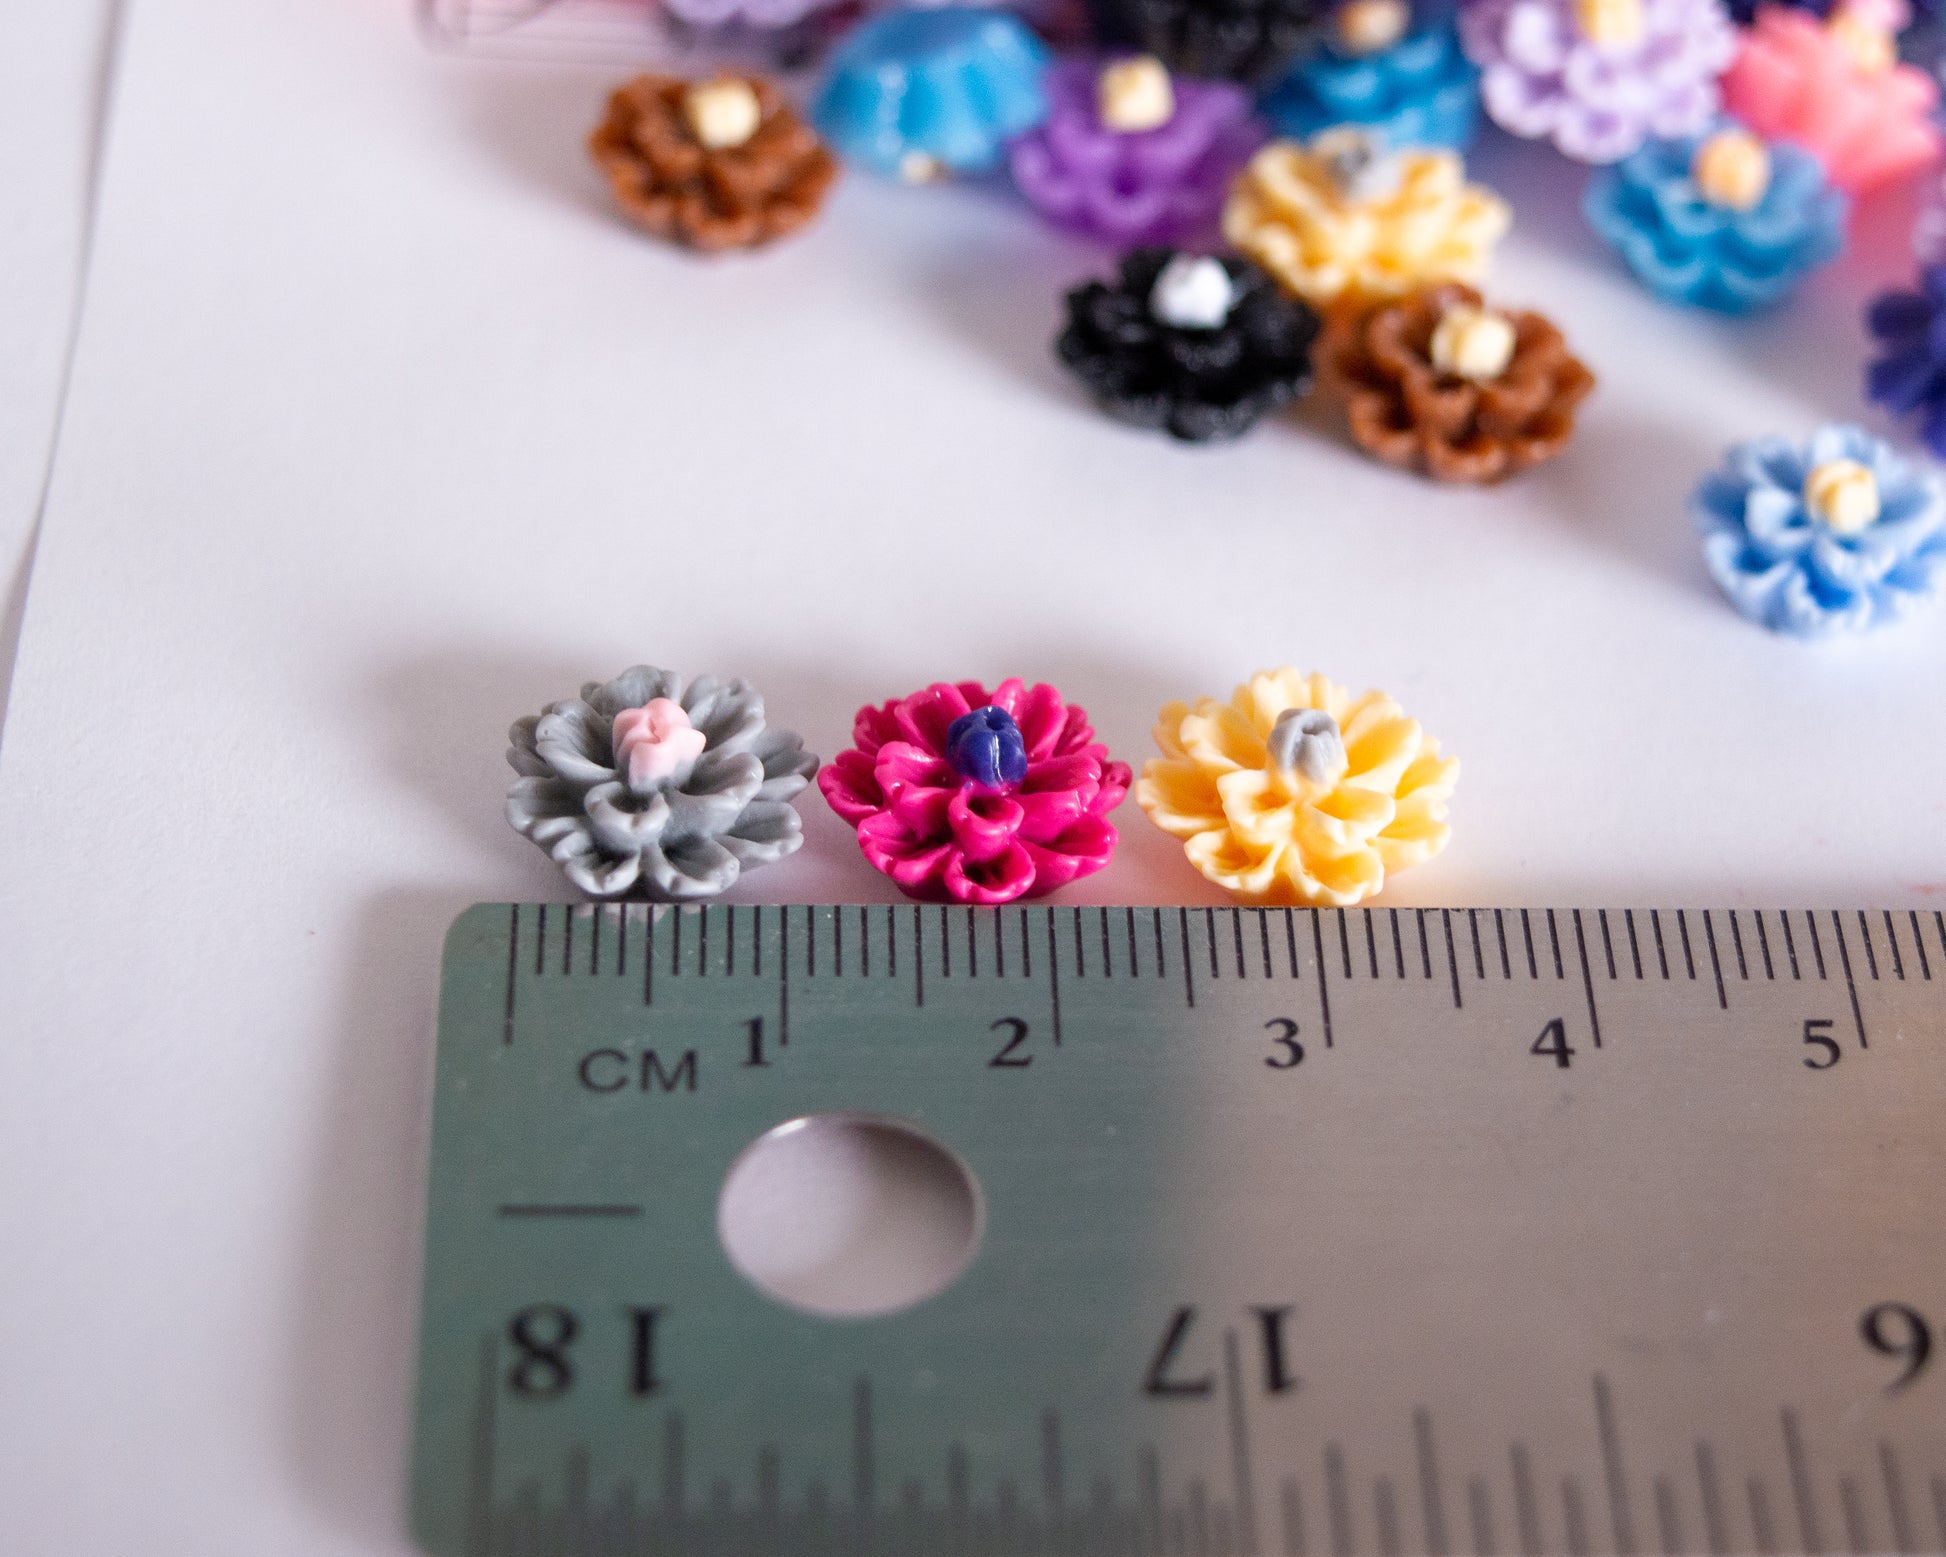  300 Pieces Resin Rose Flower Beads 12mm Mixed